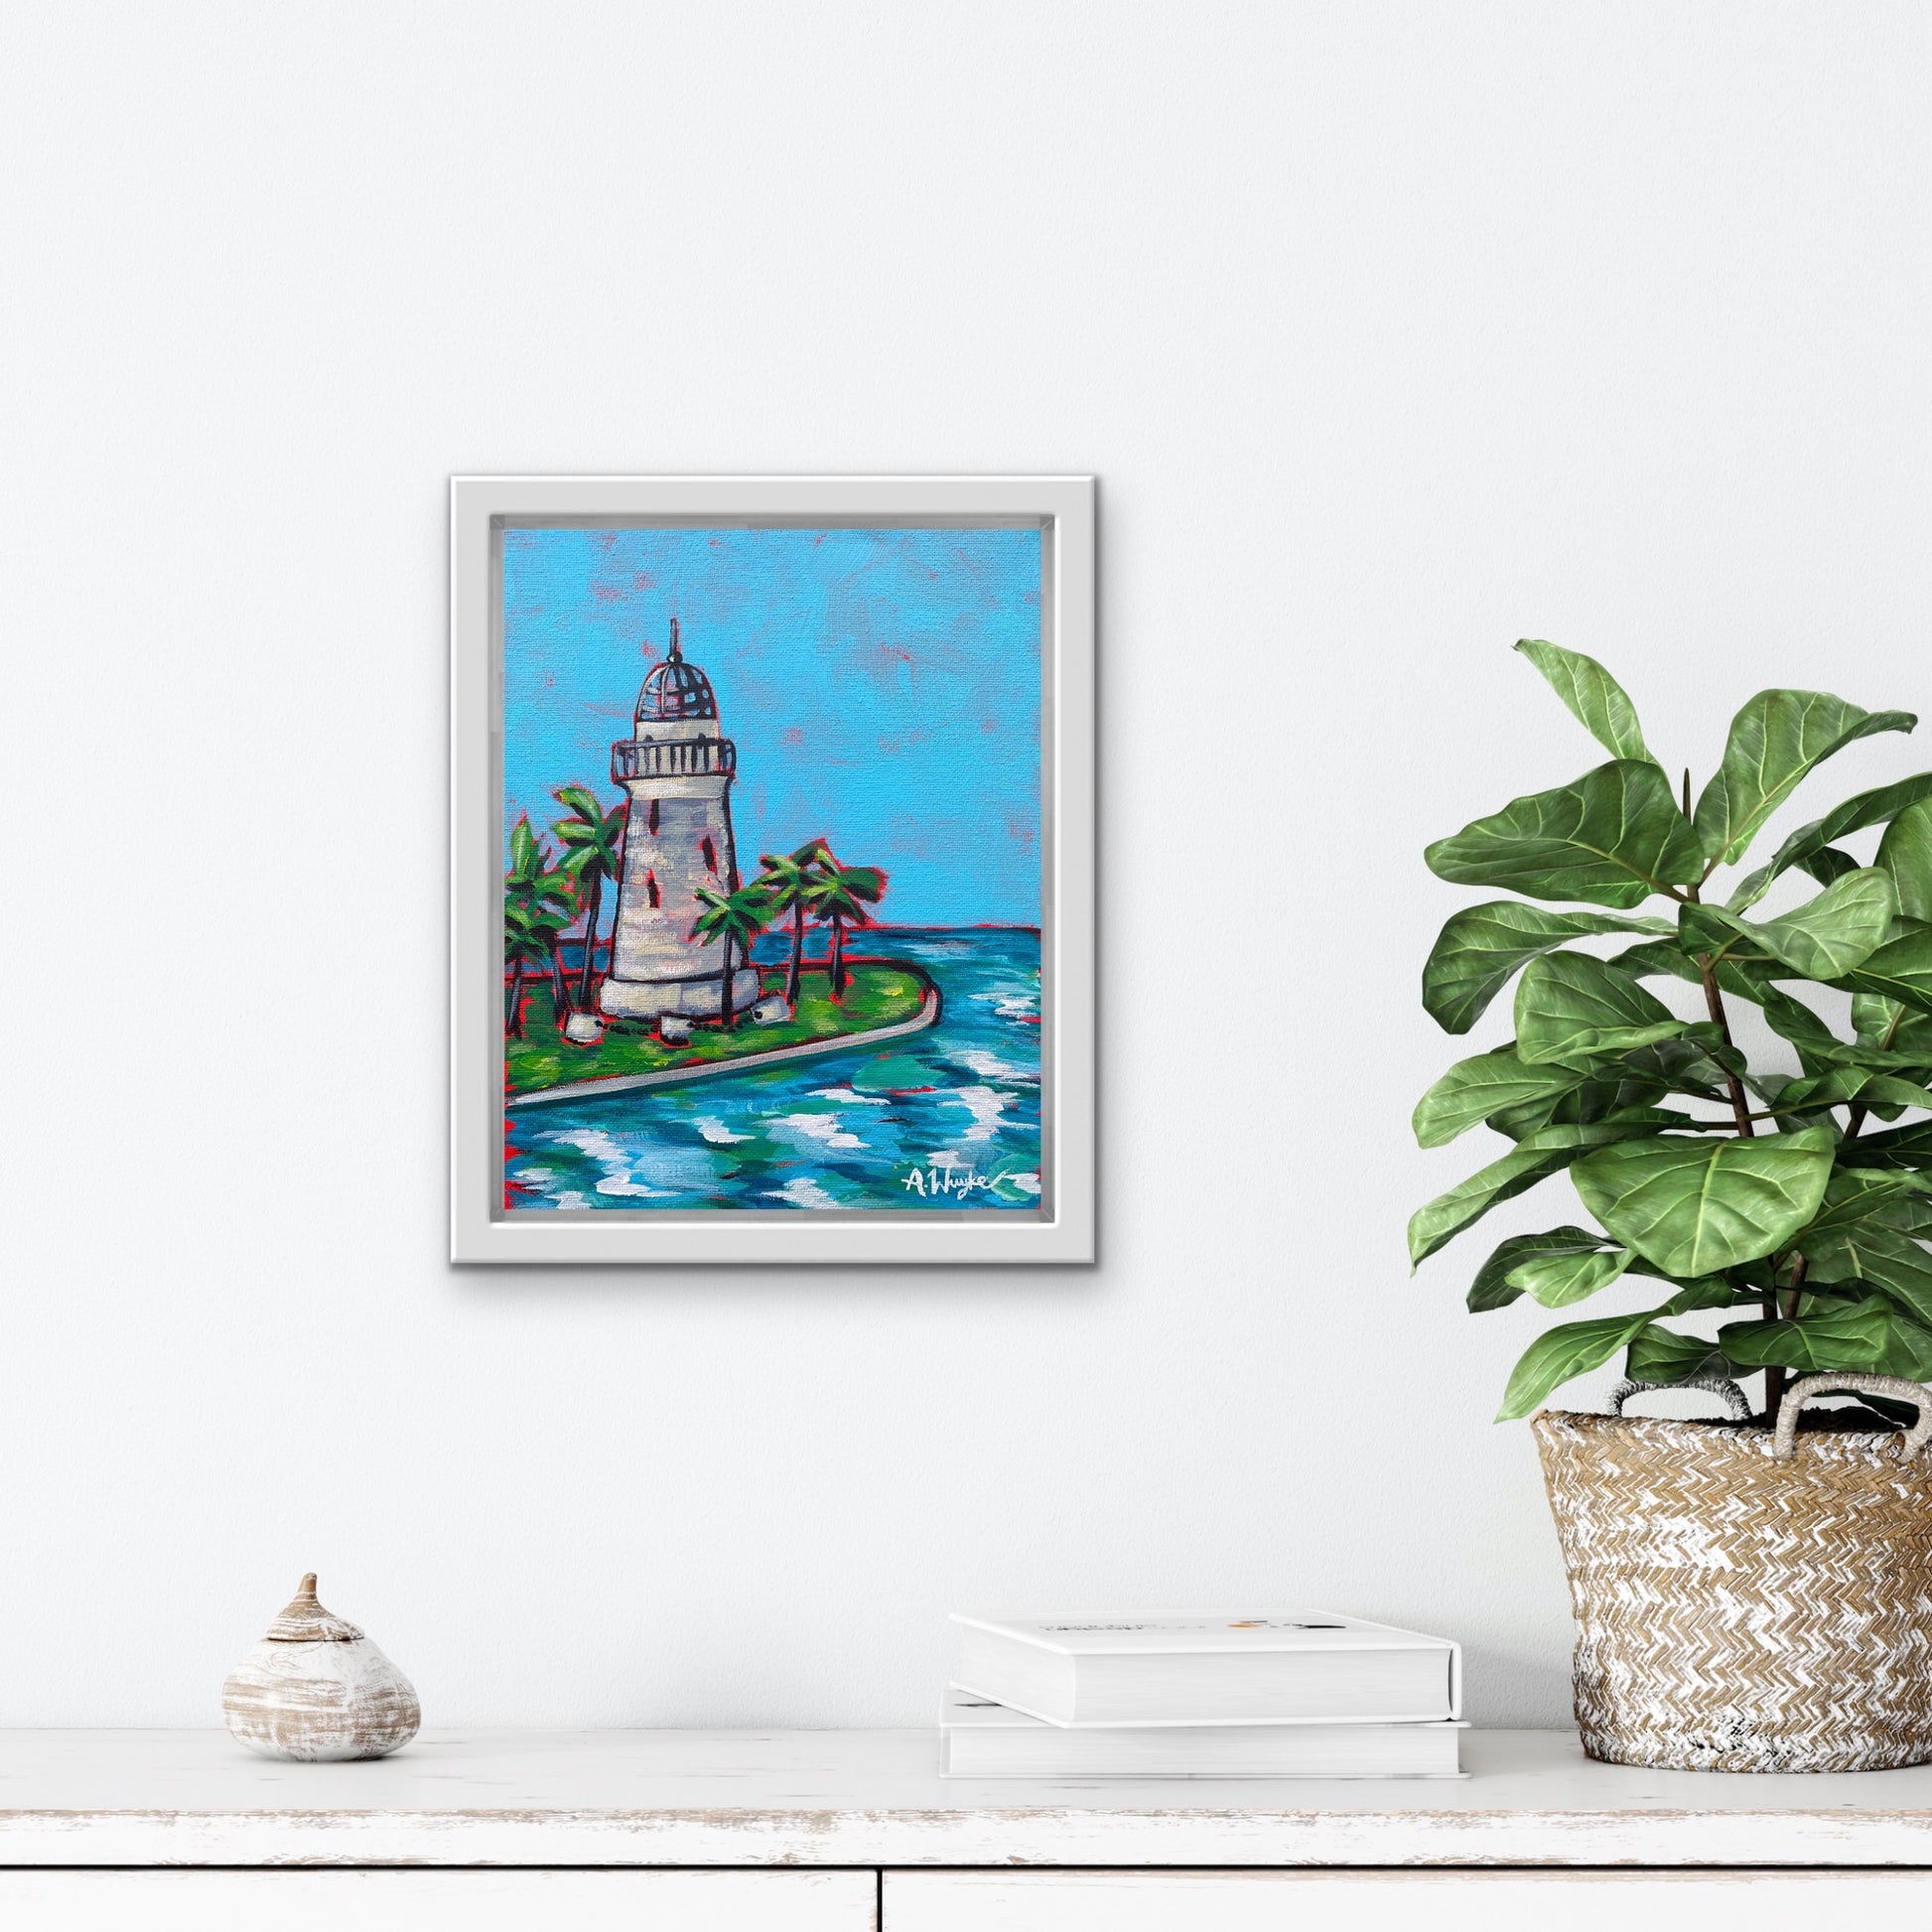 Travel Artwork By Alexandra Wuyke Art "Biscayne NP" hangs on a white wall.